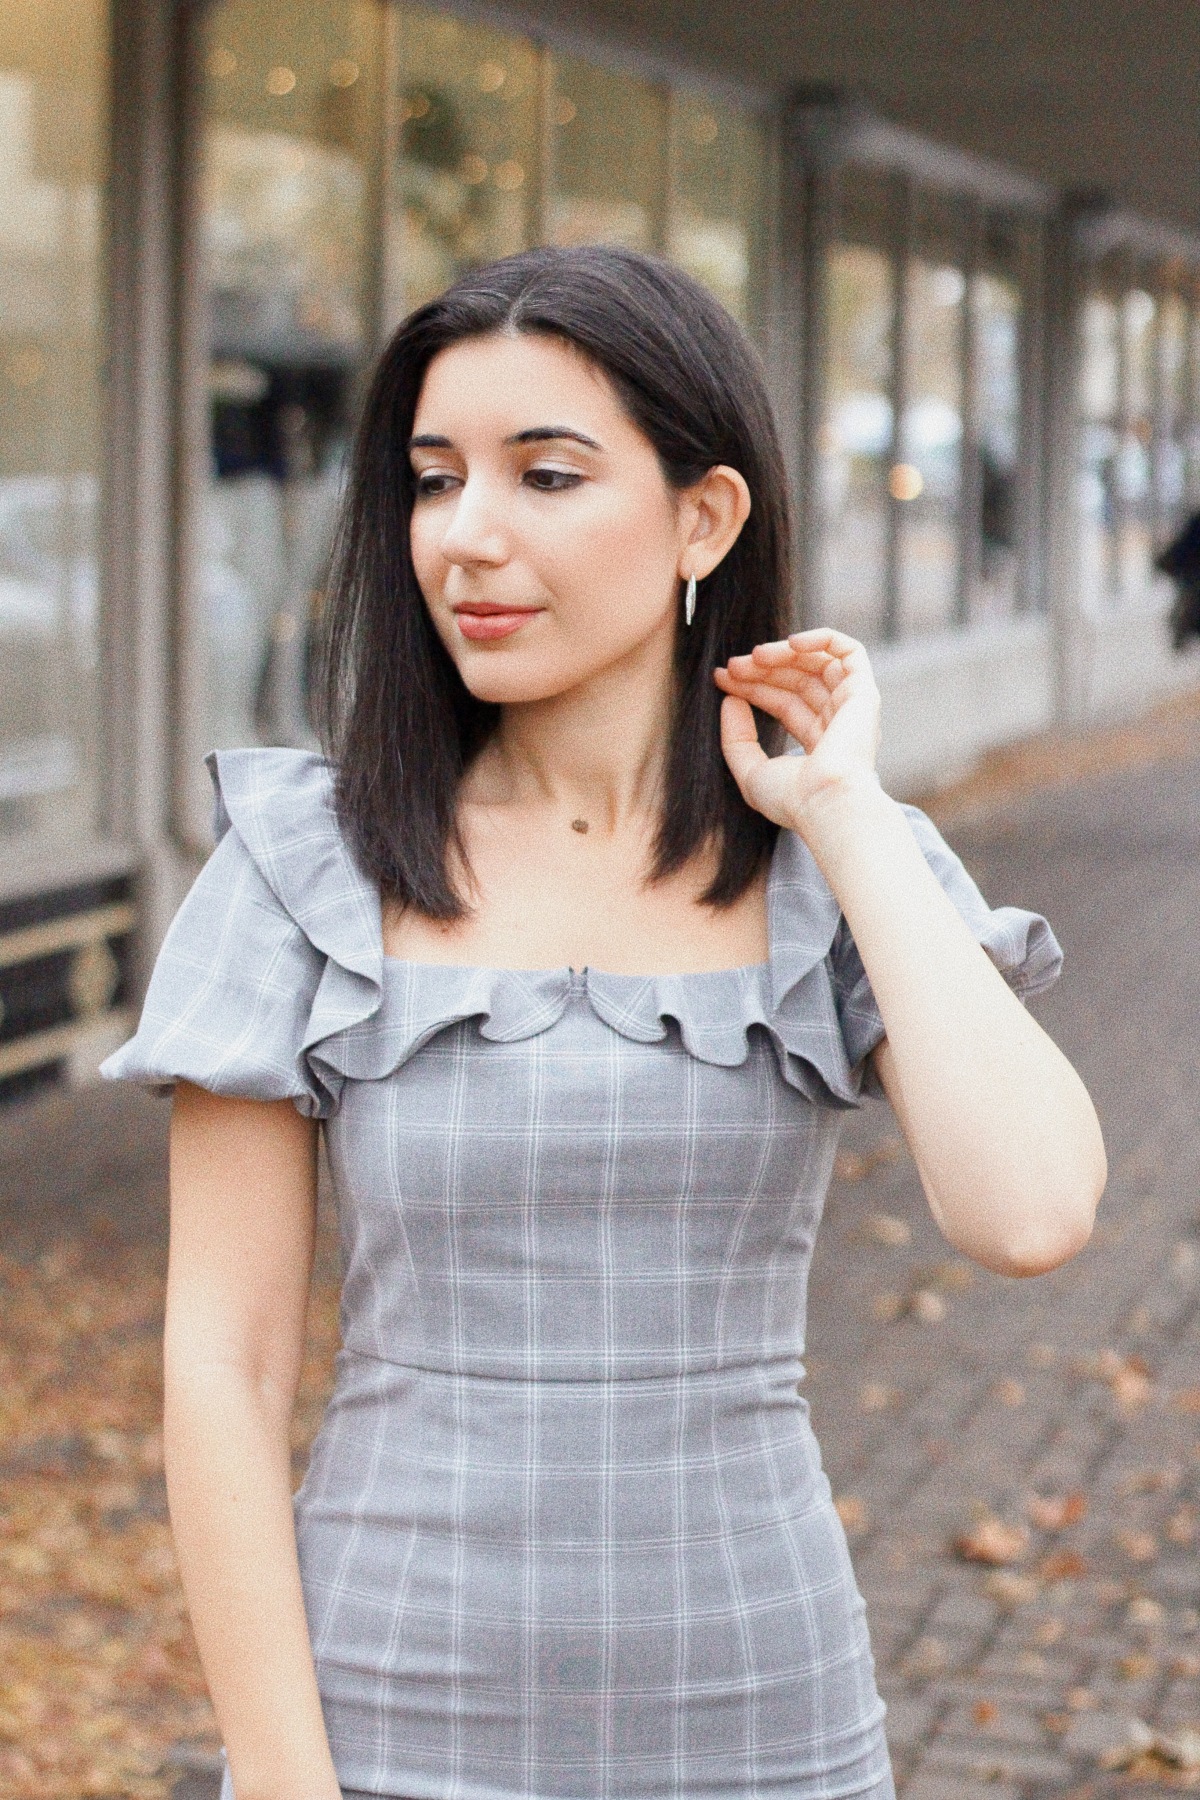 J.ing, winter fashion, winter style, winter style 2019, fashion editorial, lookbook, ootd magazine, plaid dress, gray dress, ruffles, puffy sleeves, silver hoop earrings, fashion blogger, vintage style, Little Women fashion, over-the-knee boots, suede black boots